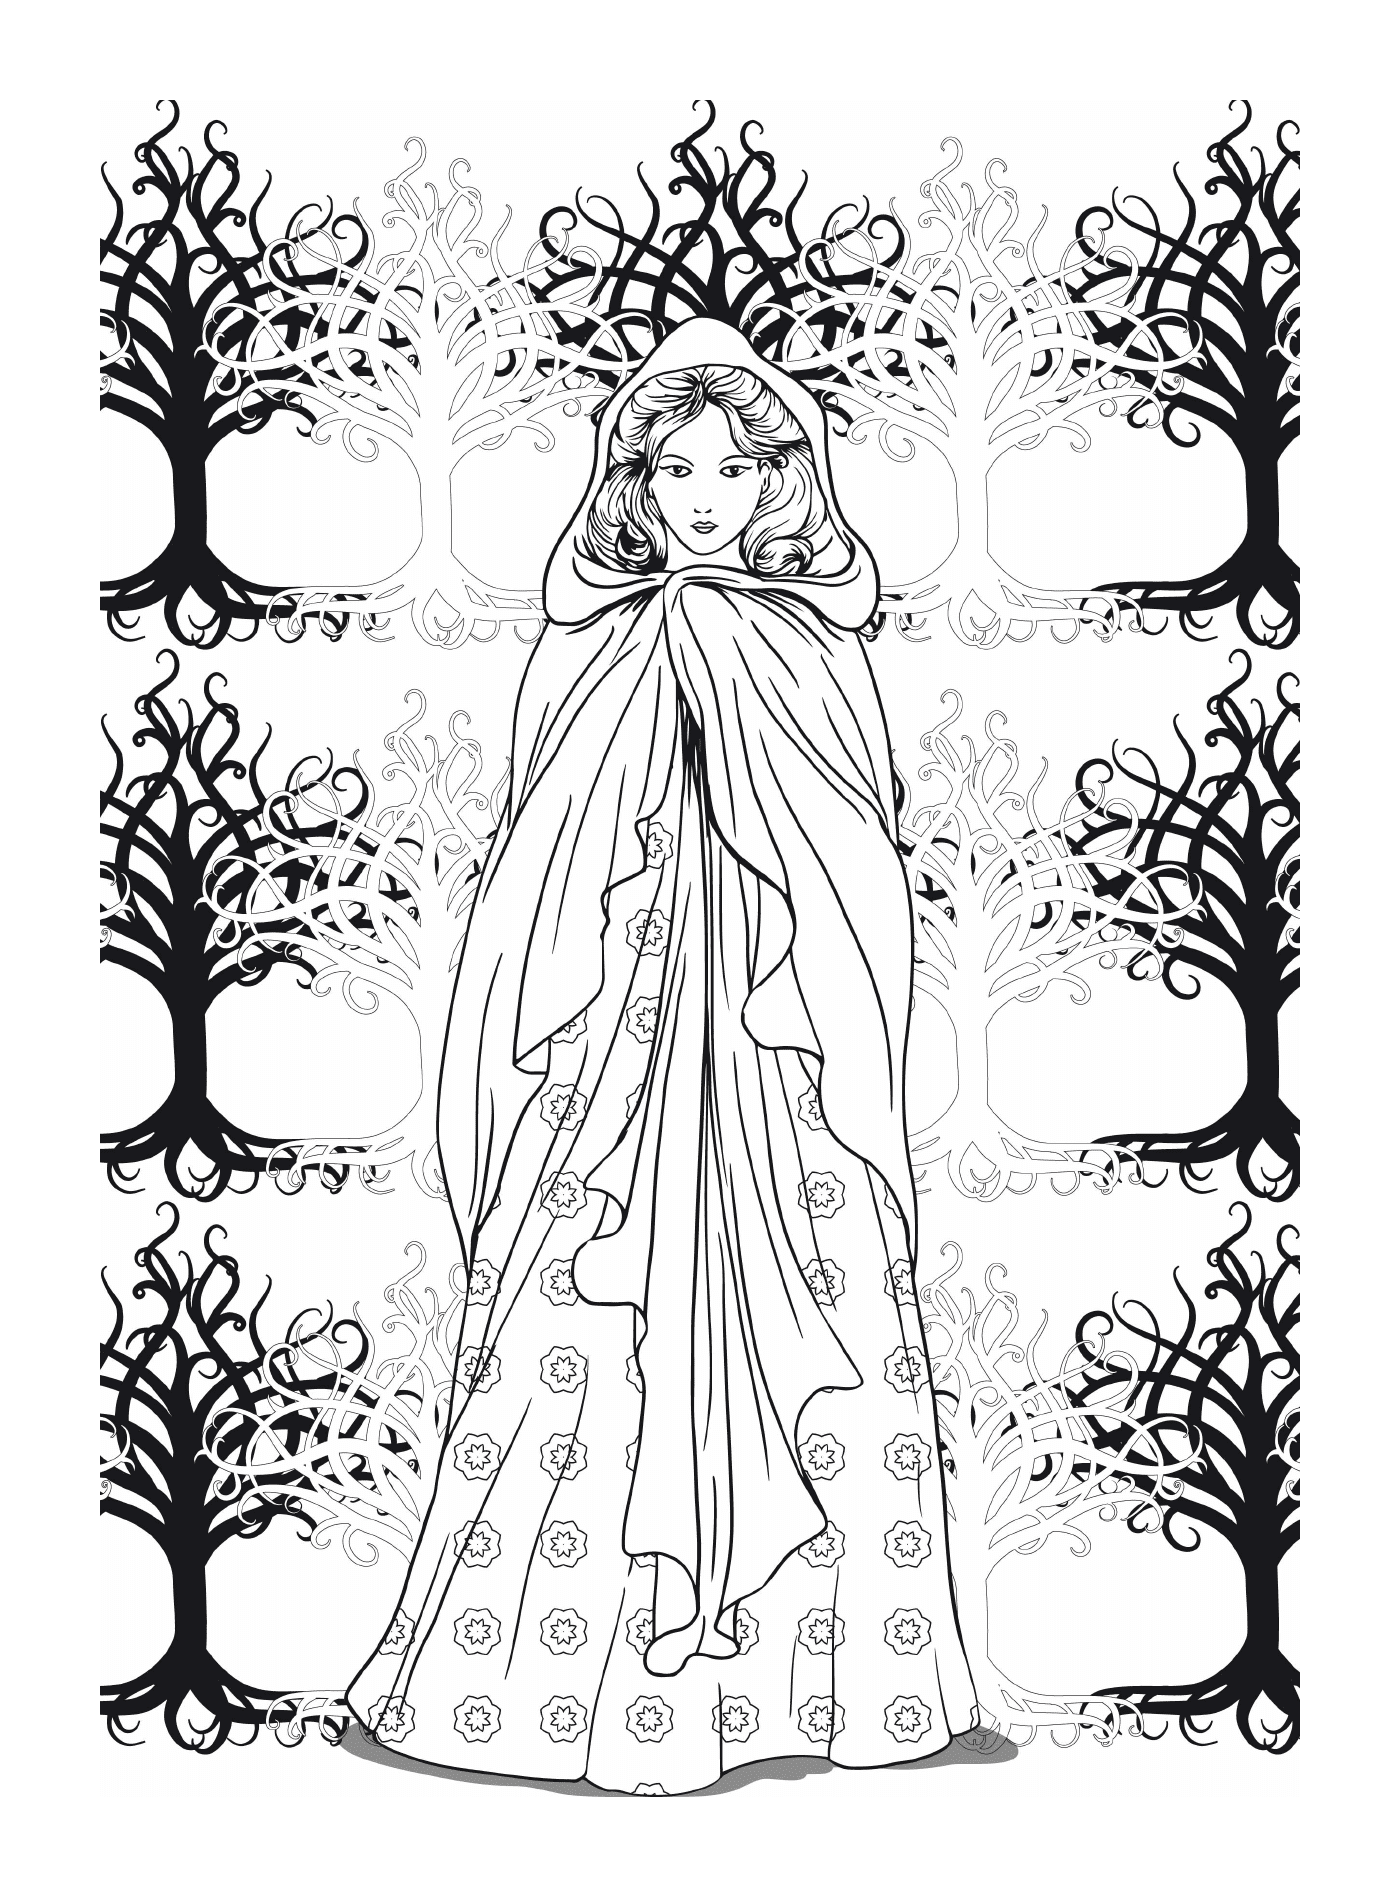  Woman surrounded by trees 